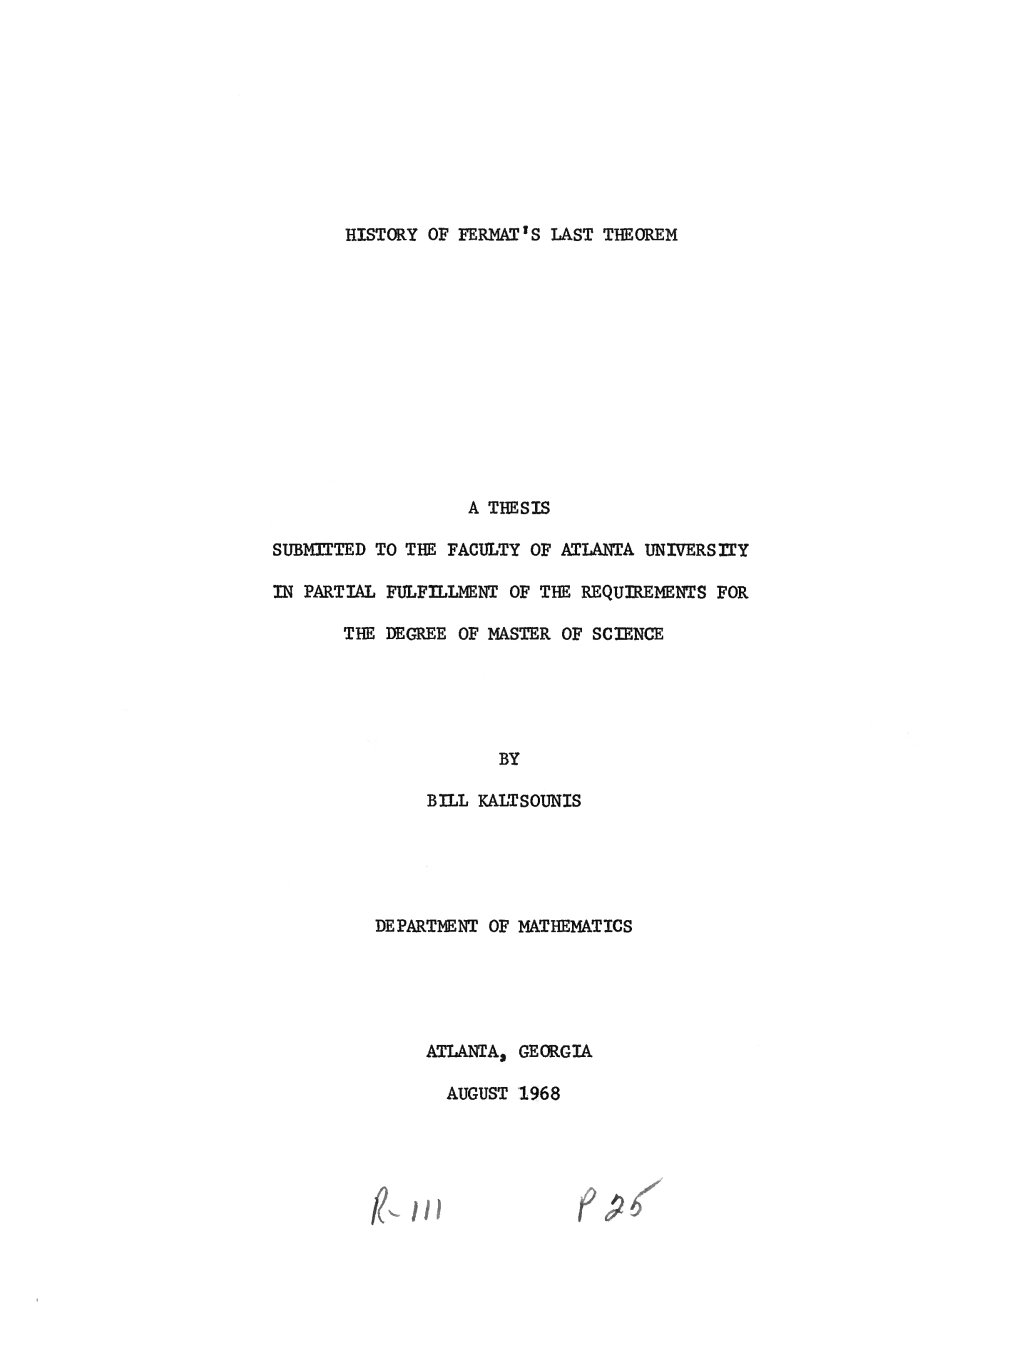 History of Fermat's Last Theorem a Thesis Submitted to the Faculty of Atlanta University in Partial Fulfillment of the Requireme